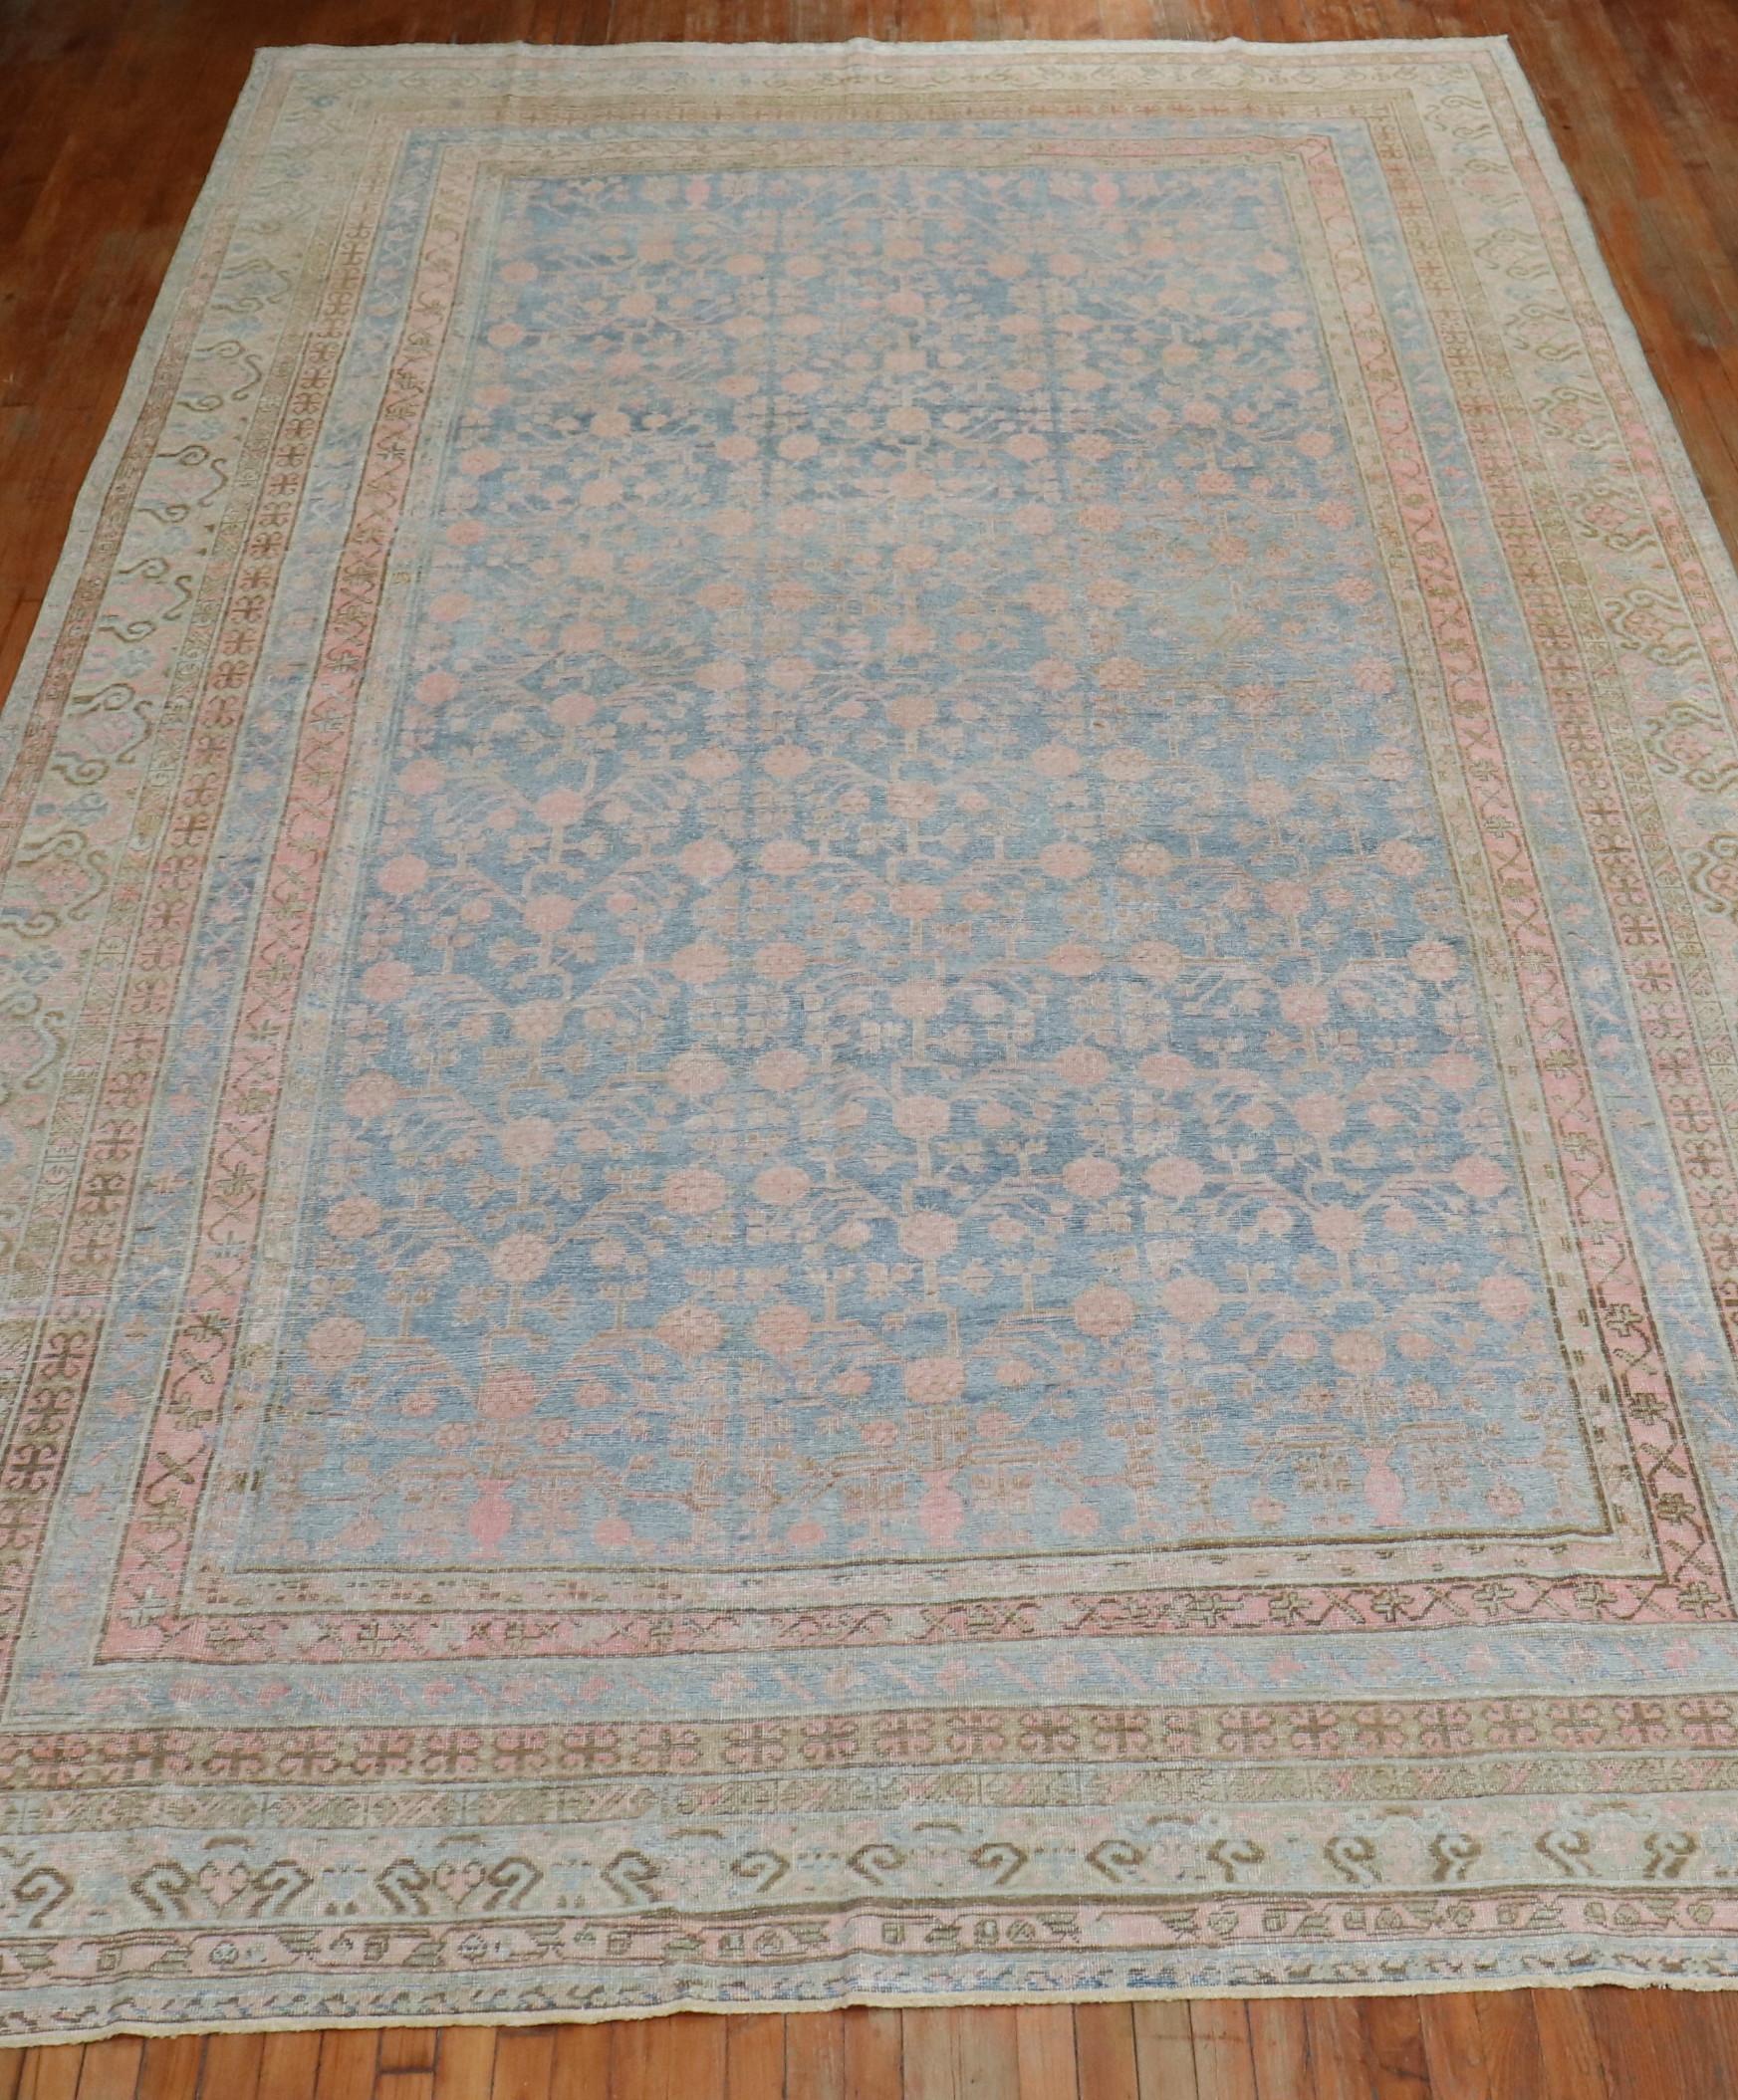 A highly decorative large antique Khotan rug from the East Turkestan Region with a light blue field, accents in pink. The pomegranate motif is infamous from this region,

circa 1910. Measures: 9'2